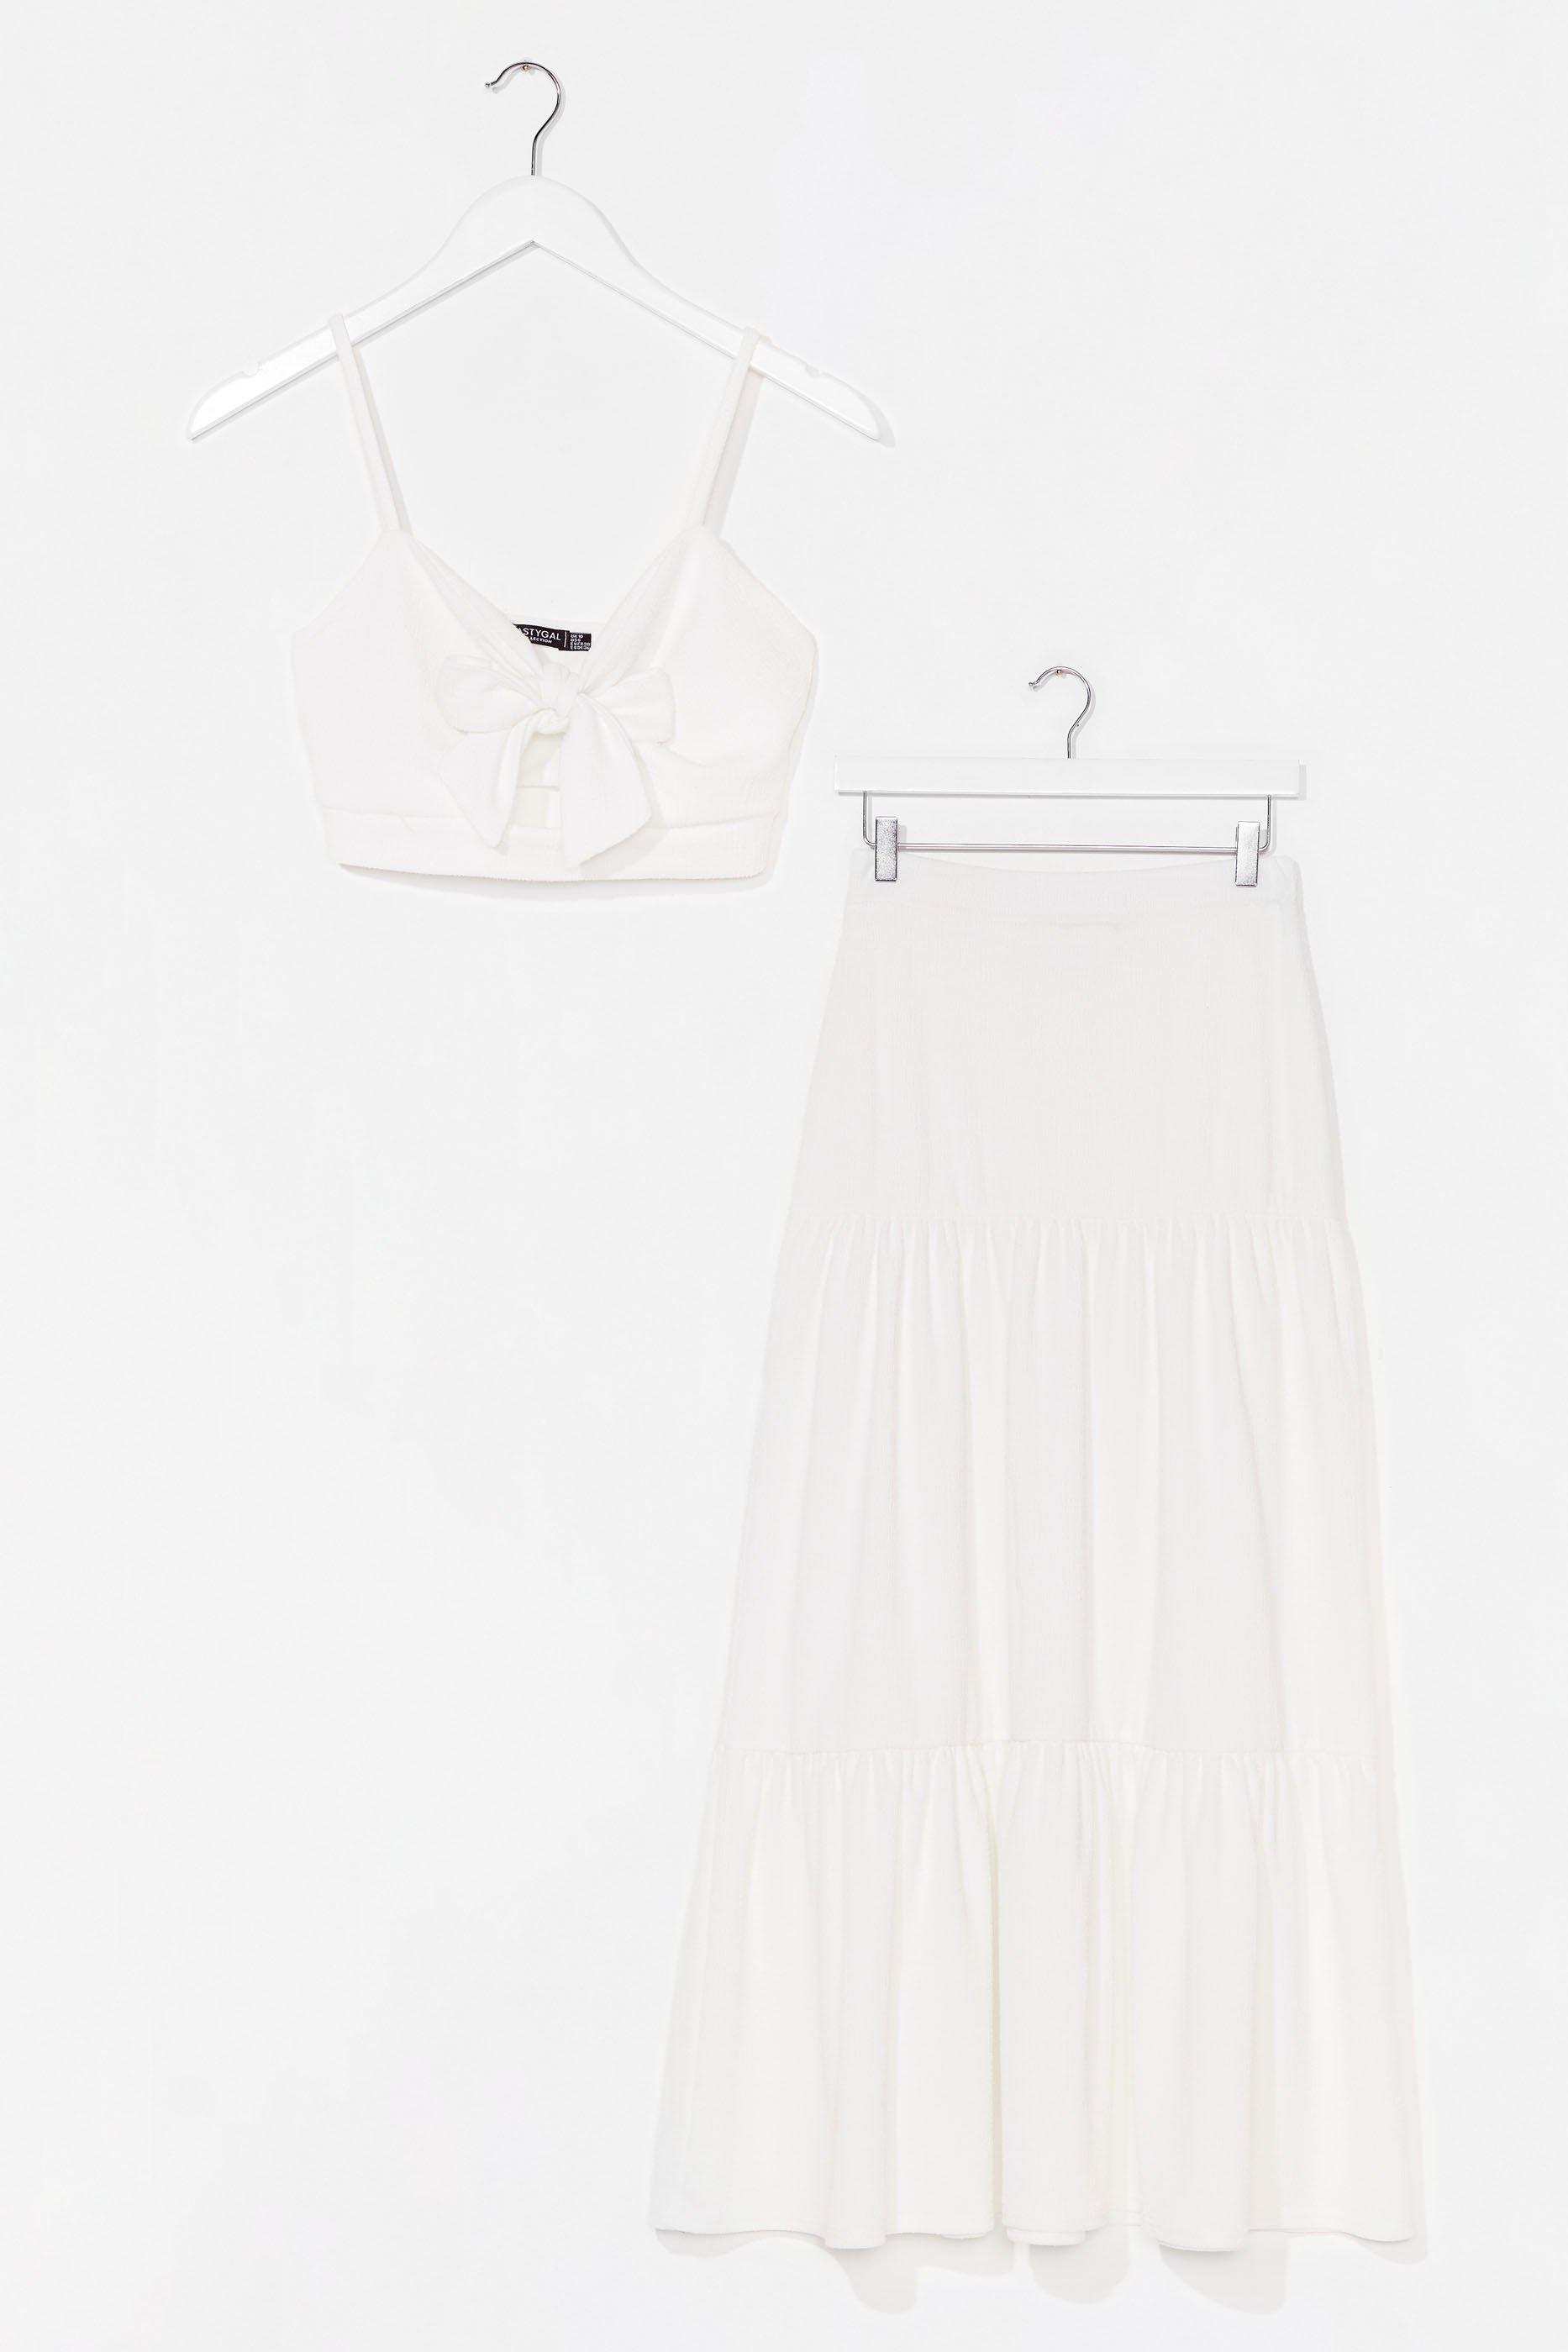 matching top for white skirt